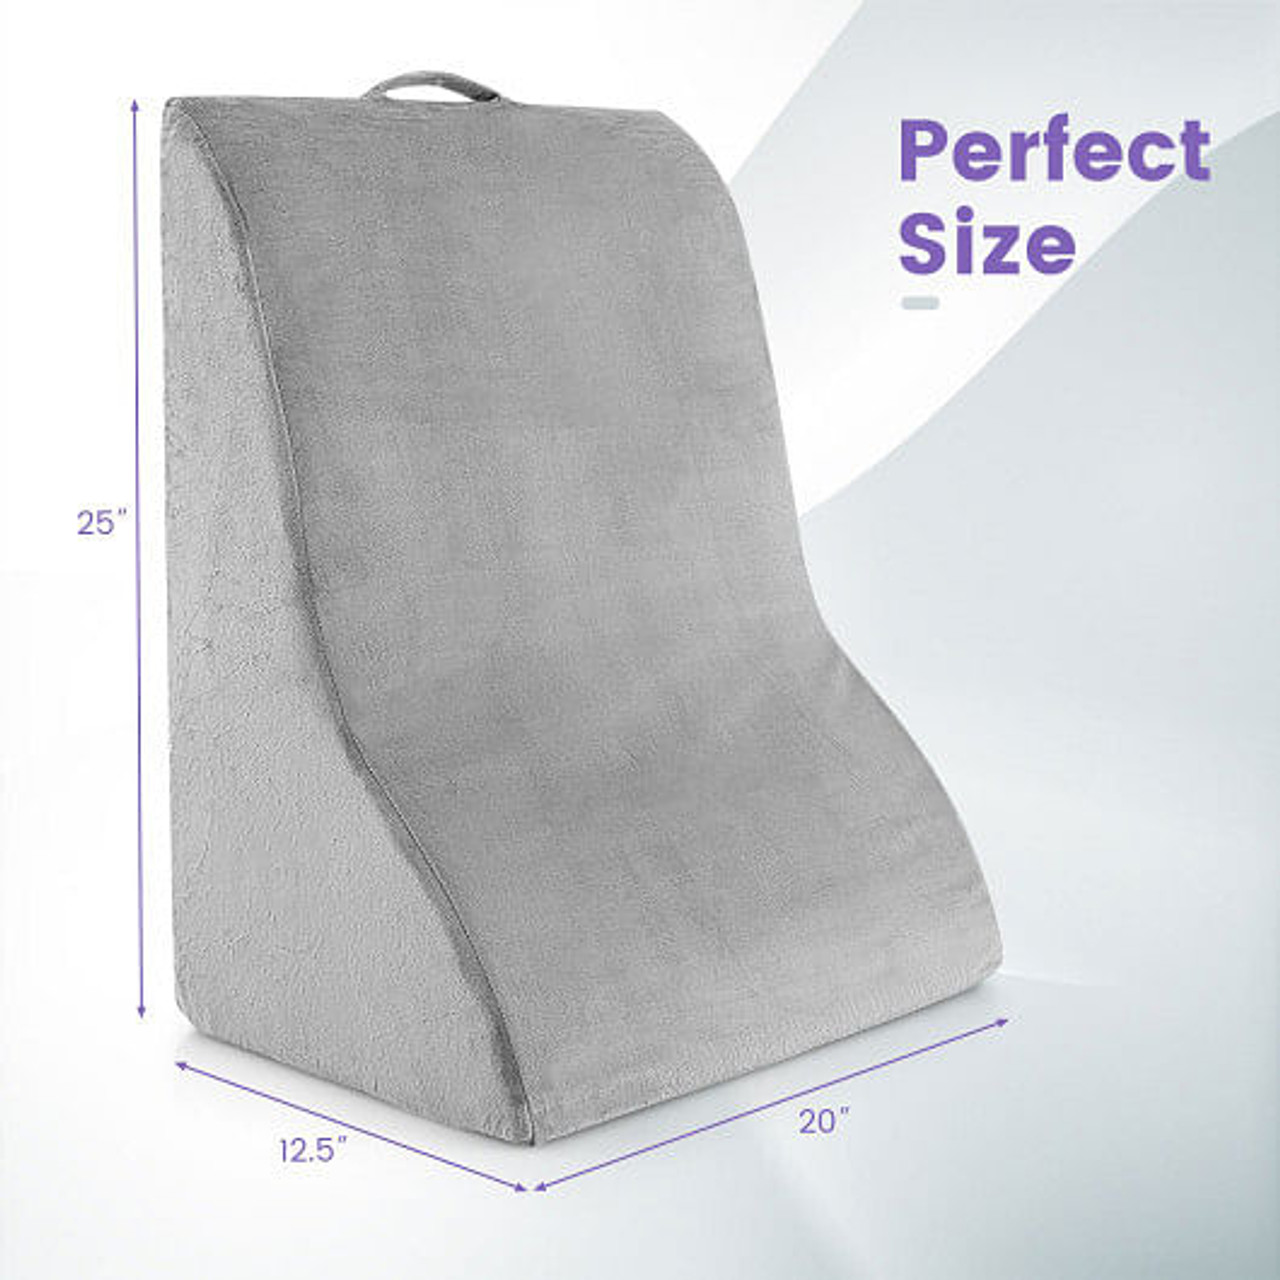 Bed Wedge Pillow Back Support Triangle Reading Pillow with Detachable Cover-Gray